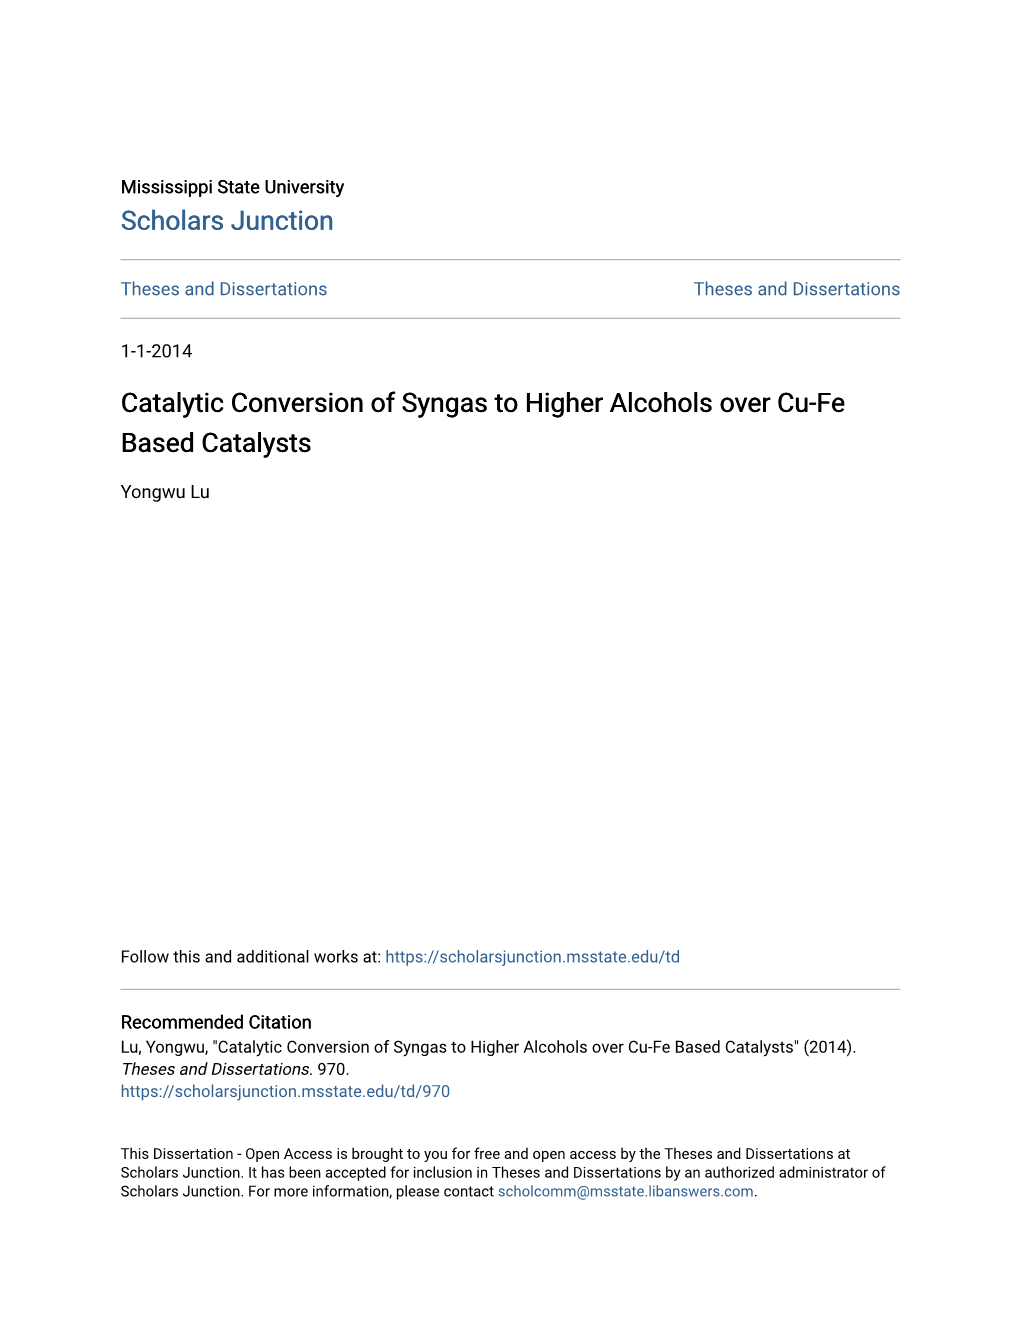 Catalytic Conversion of Syngas to Higher Alcohols Over Cu-Fe Based Catalysts